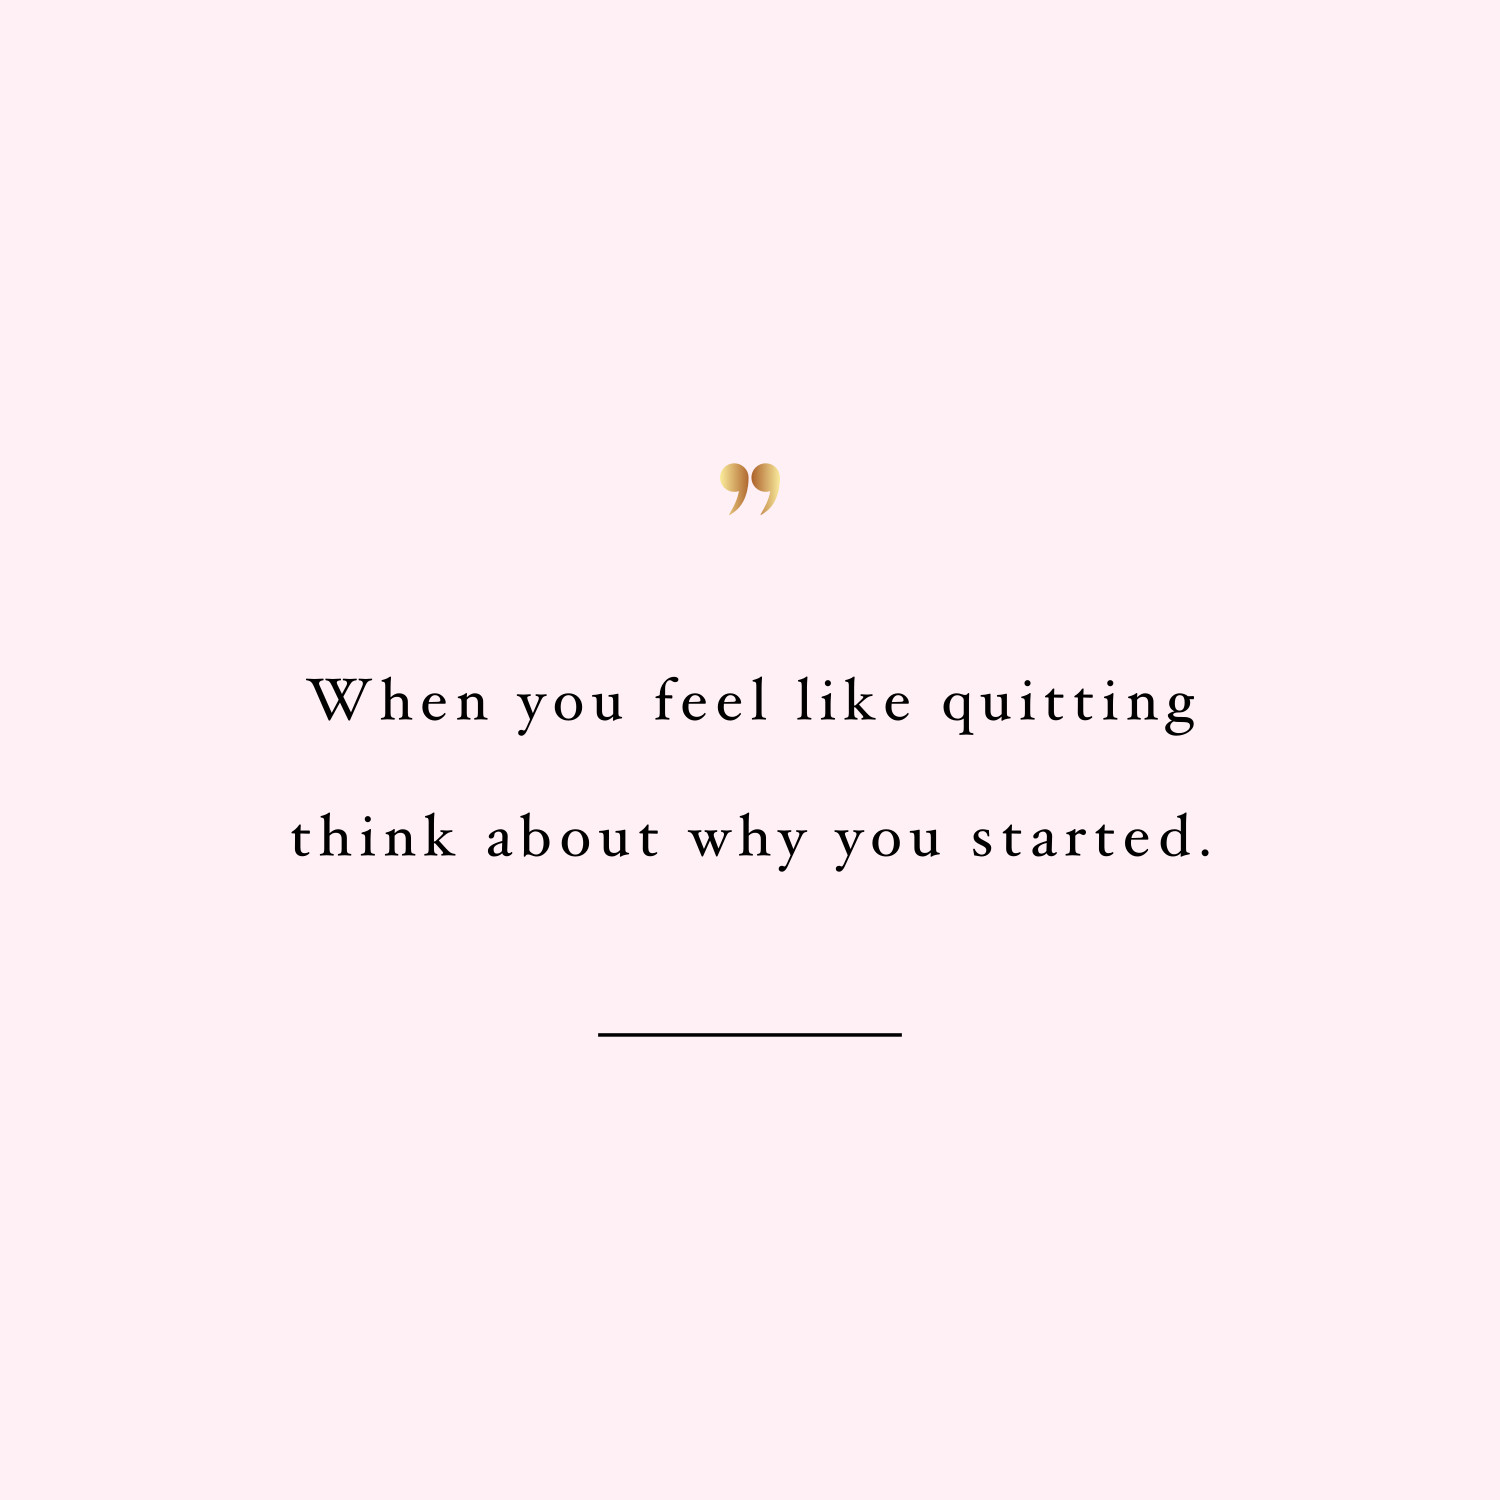 Don't quit! Browse our collection of inspirational fitness quotes and get instant workout and exercise motivation. Stay focused and get fit, healthy and happy! https://www.spotebi.com/workout-motivation/fitness-quote-dont-quit/